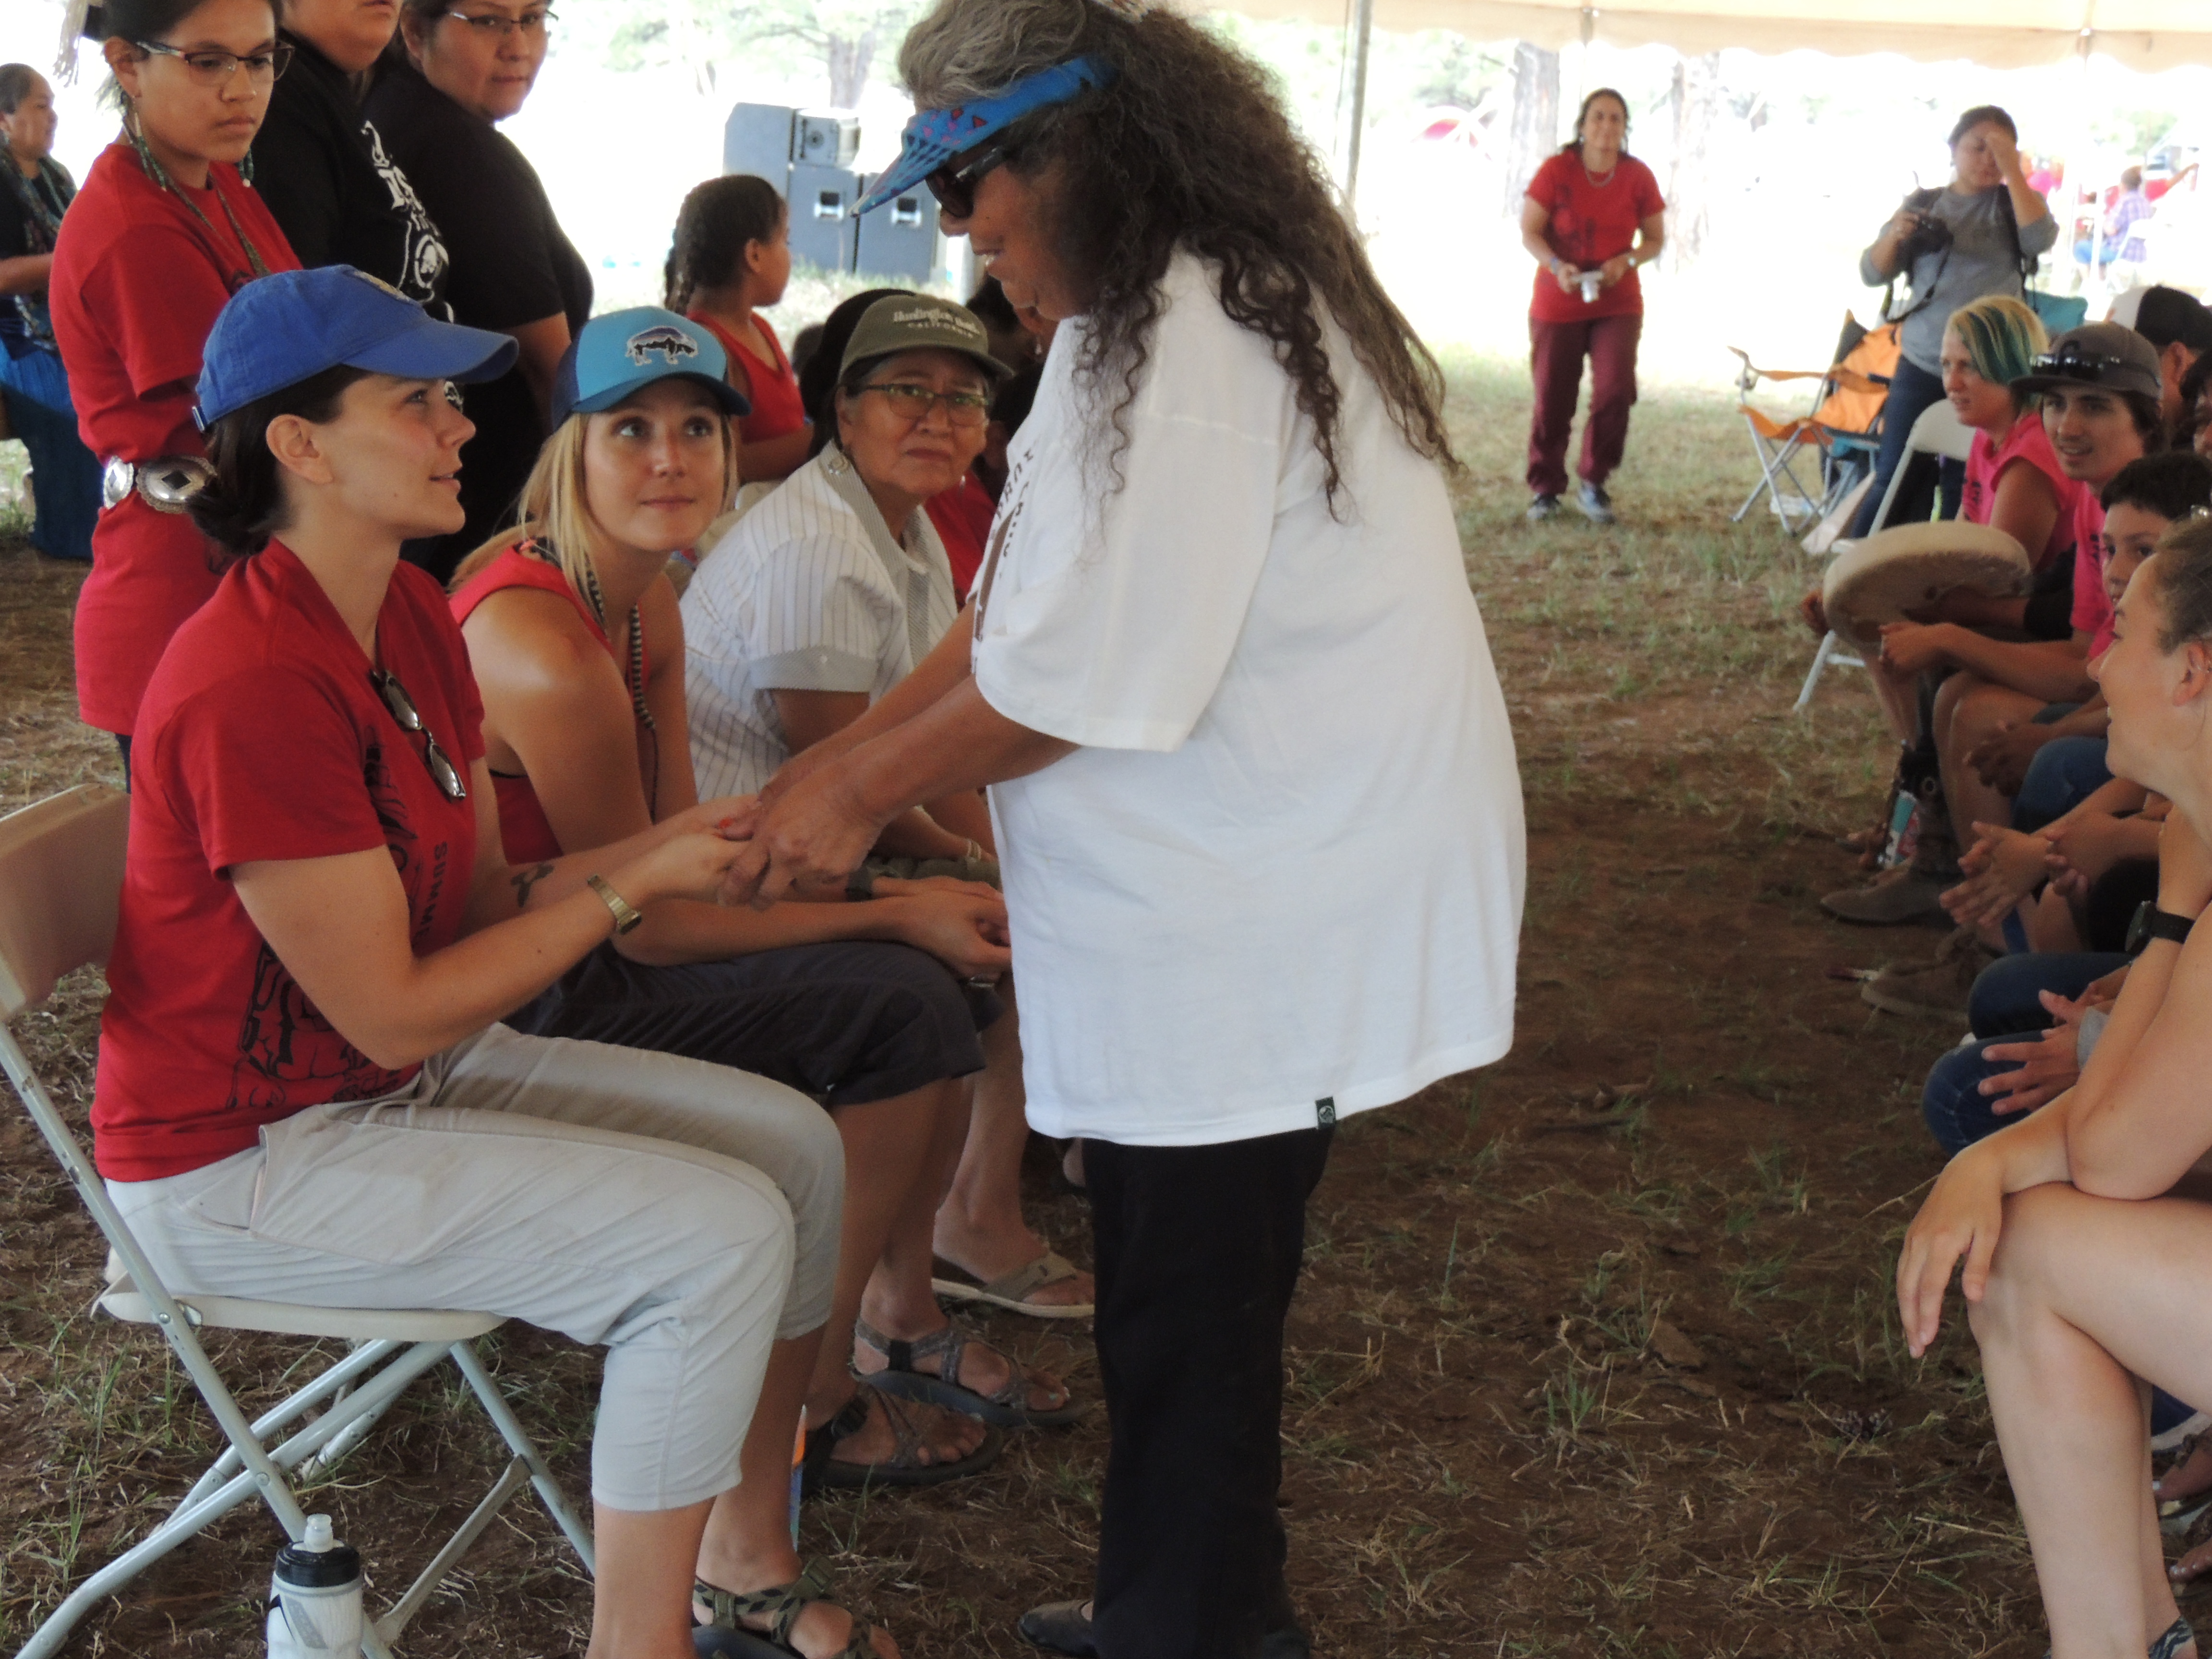 Lena learns traditional hand games from leaders at the Gathering. 